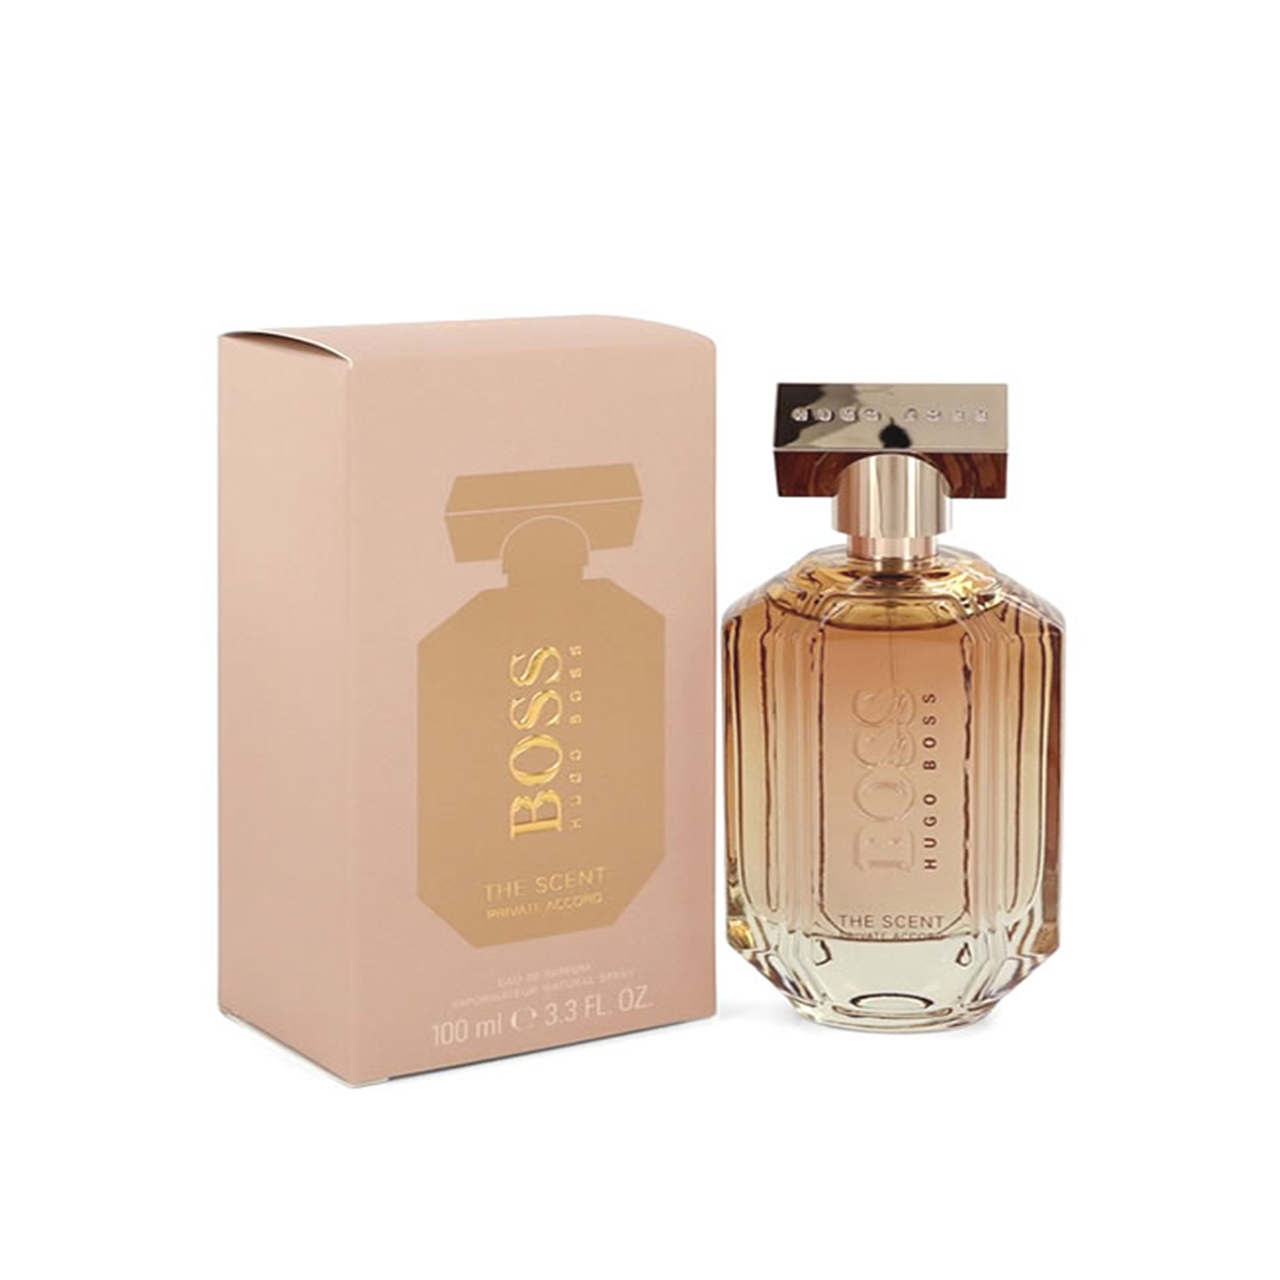 Hugo Boss the Scent for her EDP, 100 ml. The Scent for her Eau de Parfum. Hugo Boss the Scent absolute for her. Пирамида Boss the Scent for her. Цена духов босс в летуаль